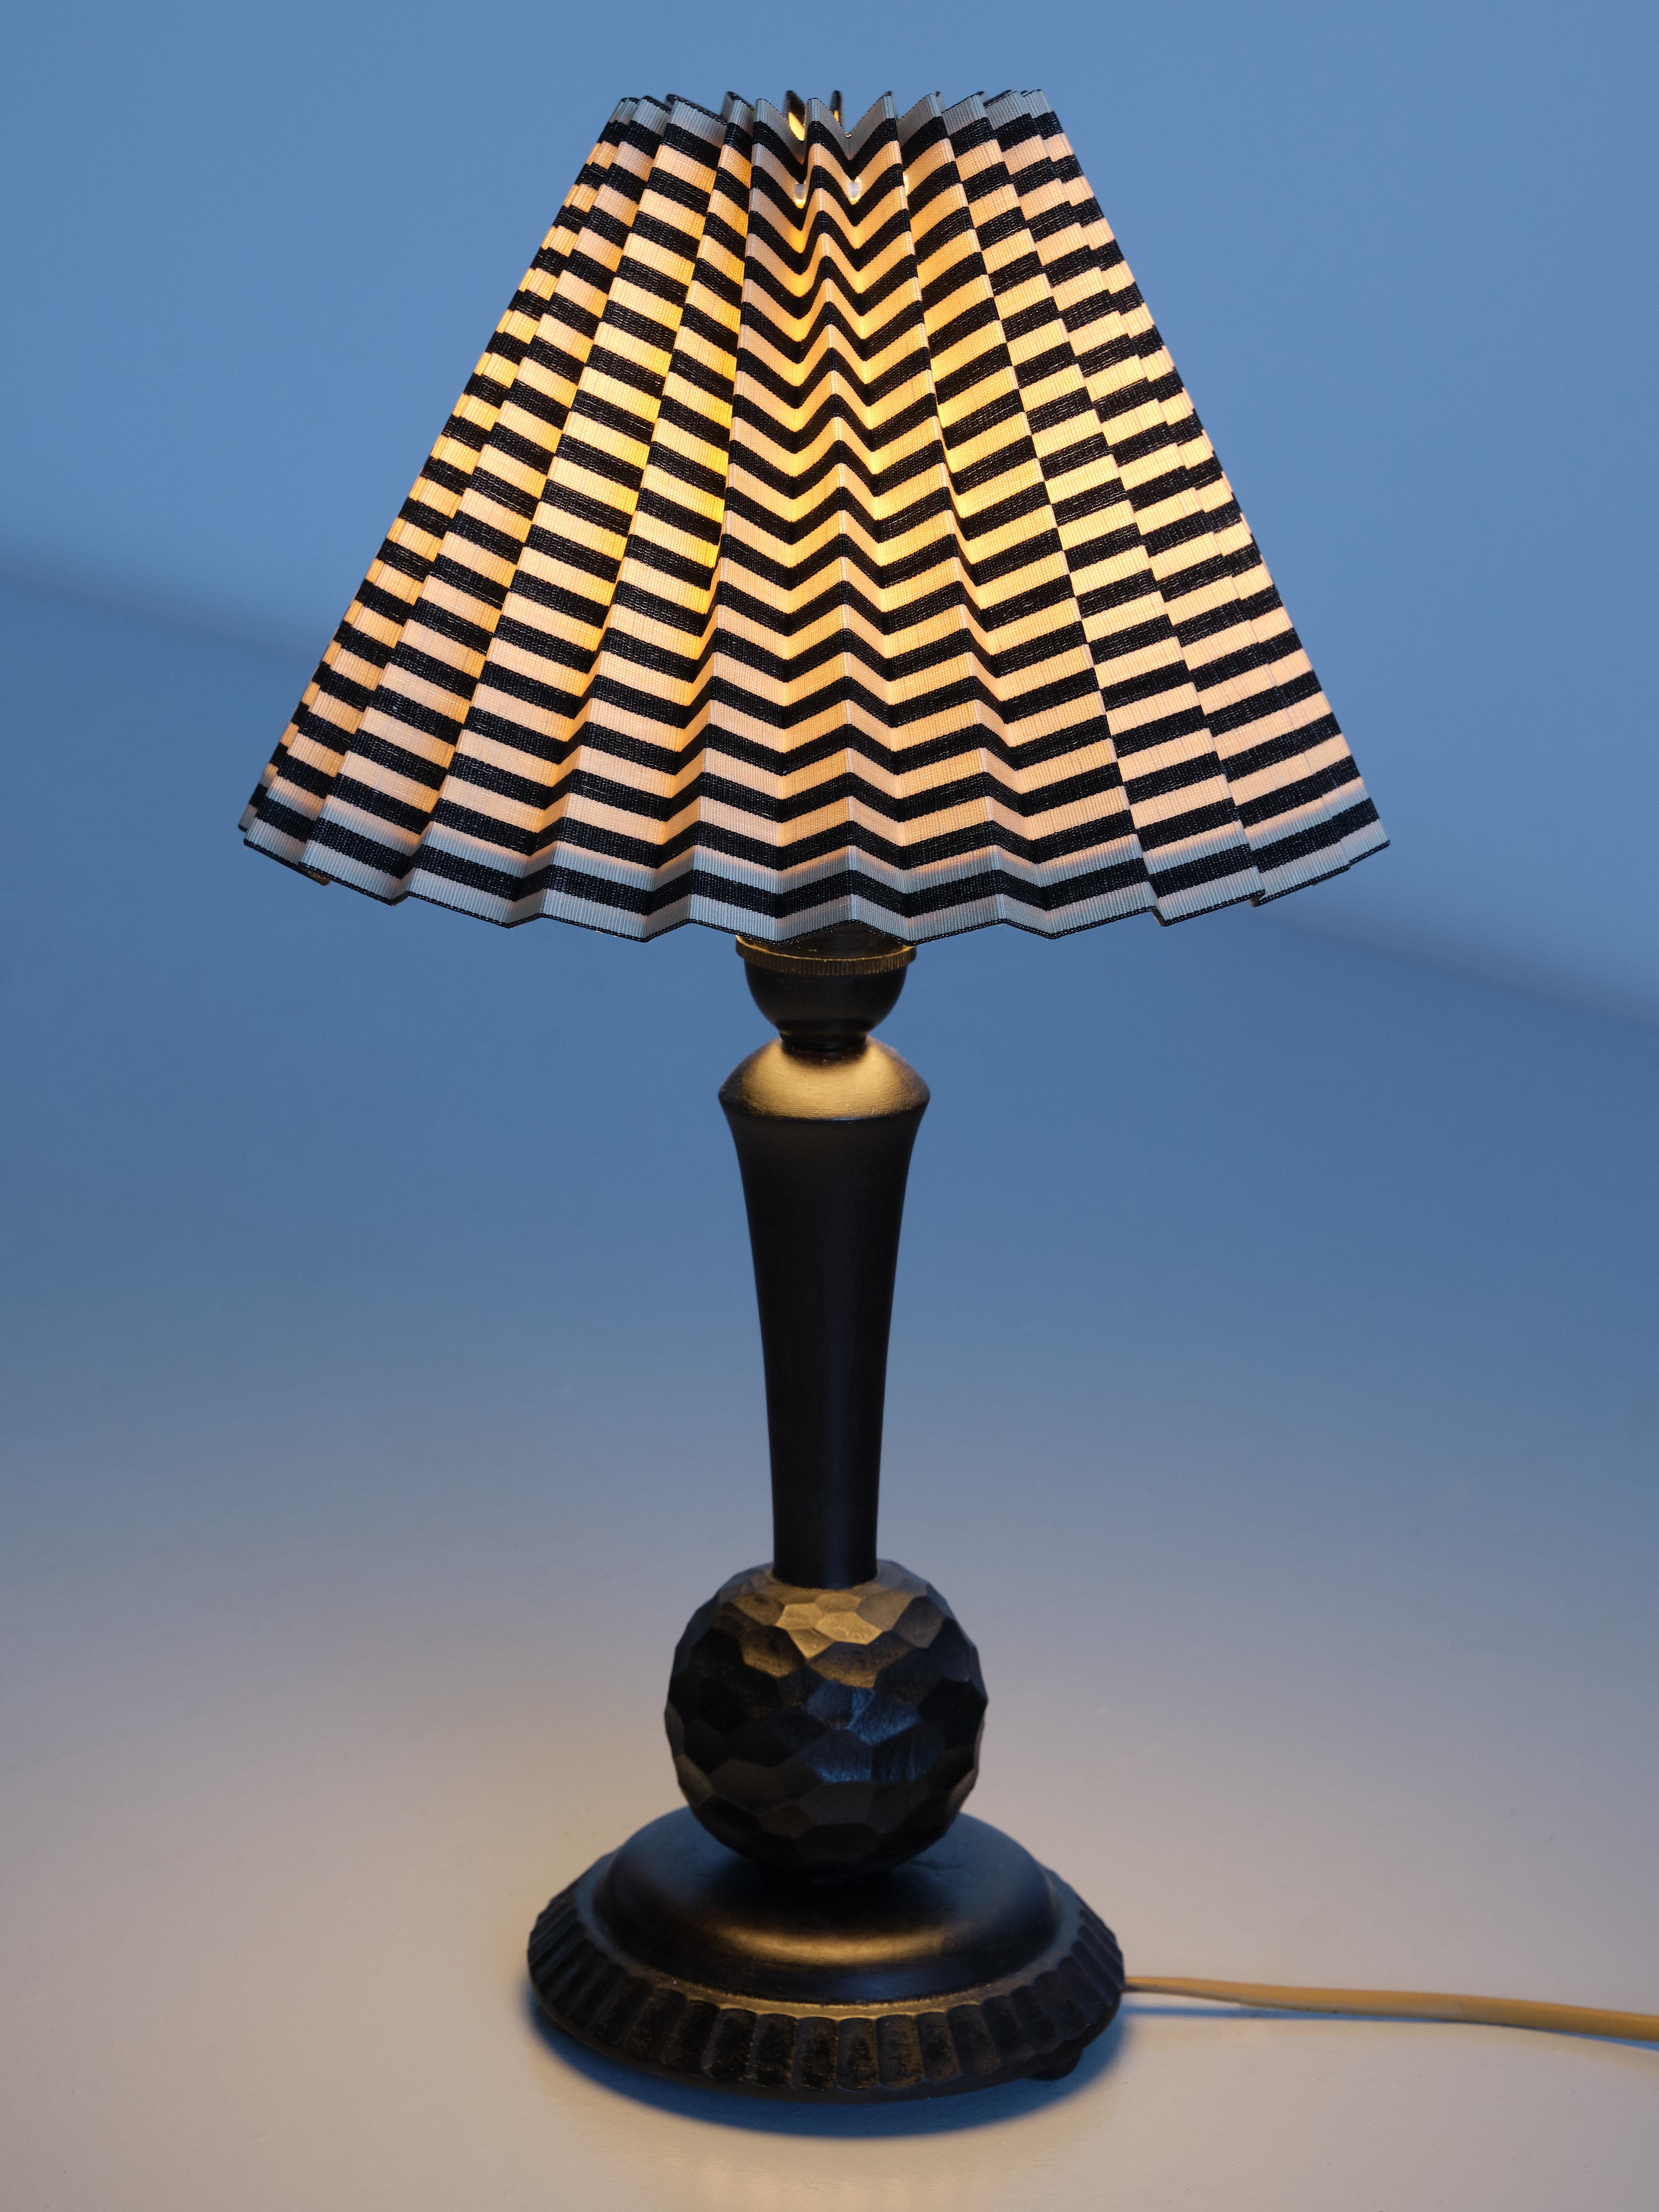 black and white striped lamp base